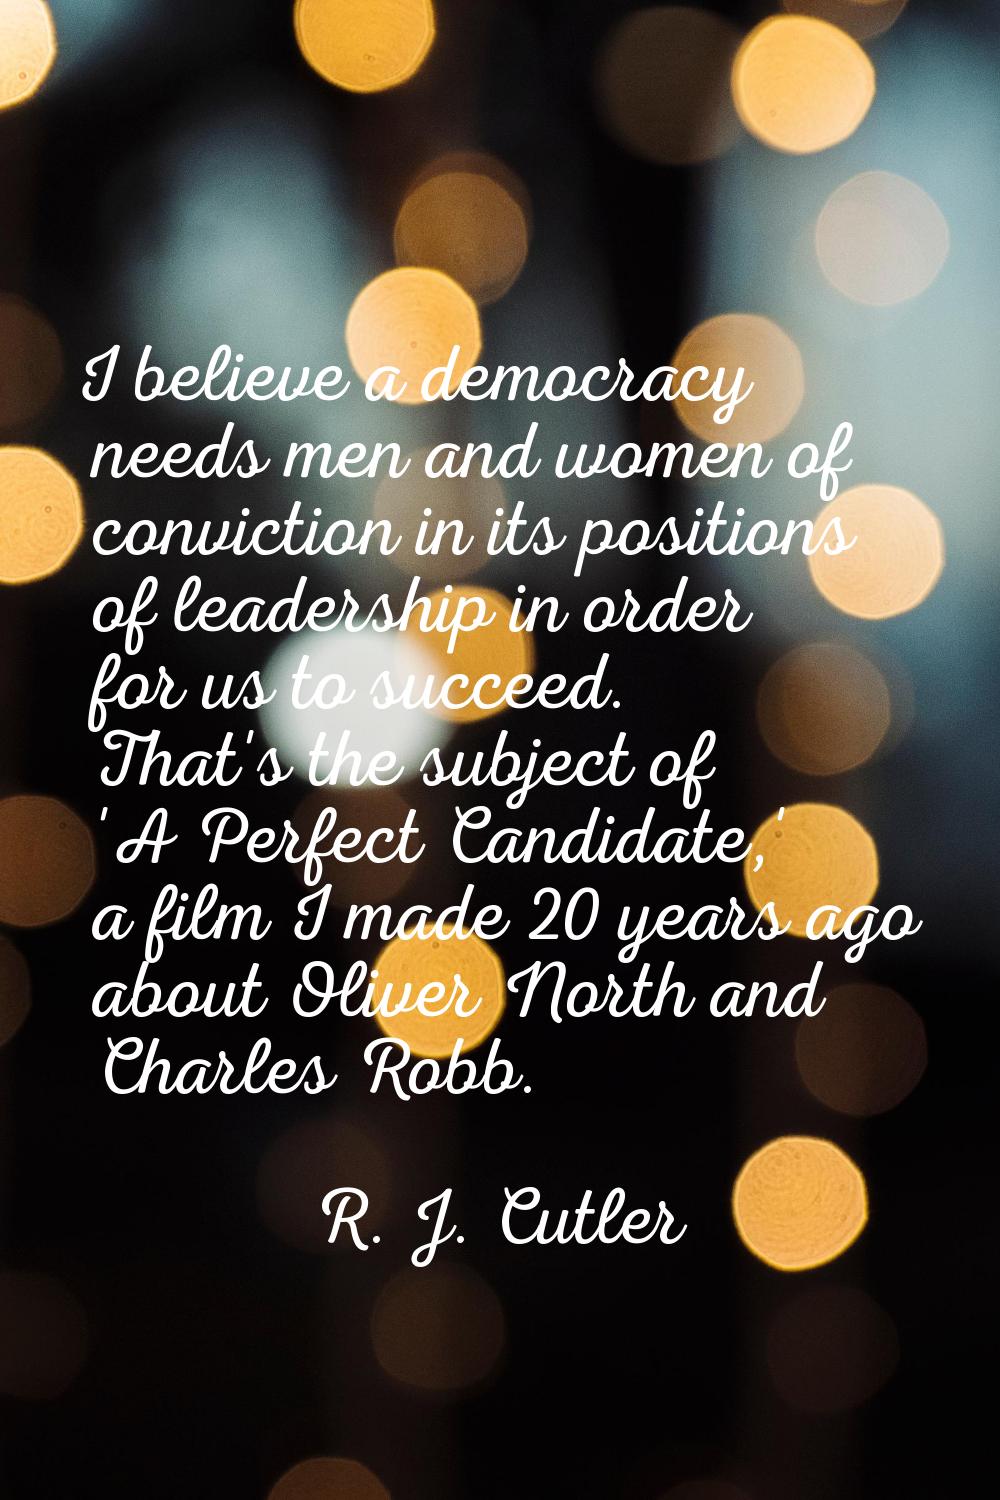 I believe a democracy needs men and women of conviction in its positions of leadership in order for